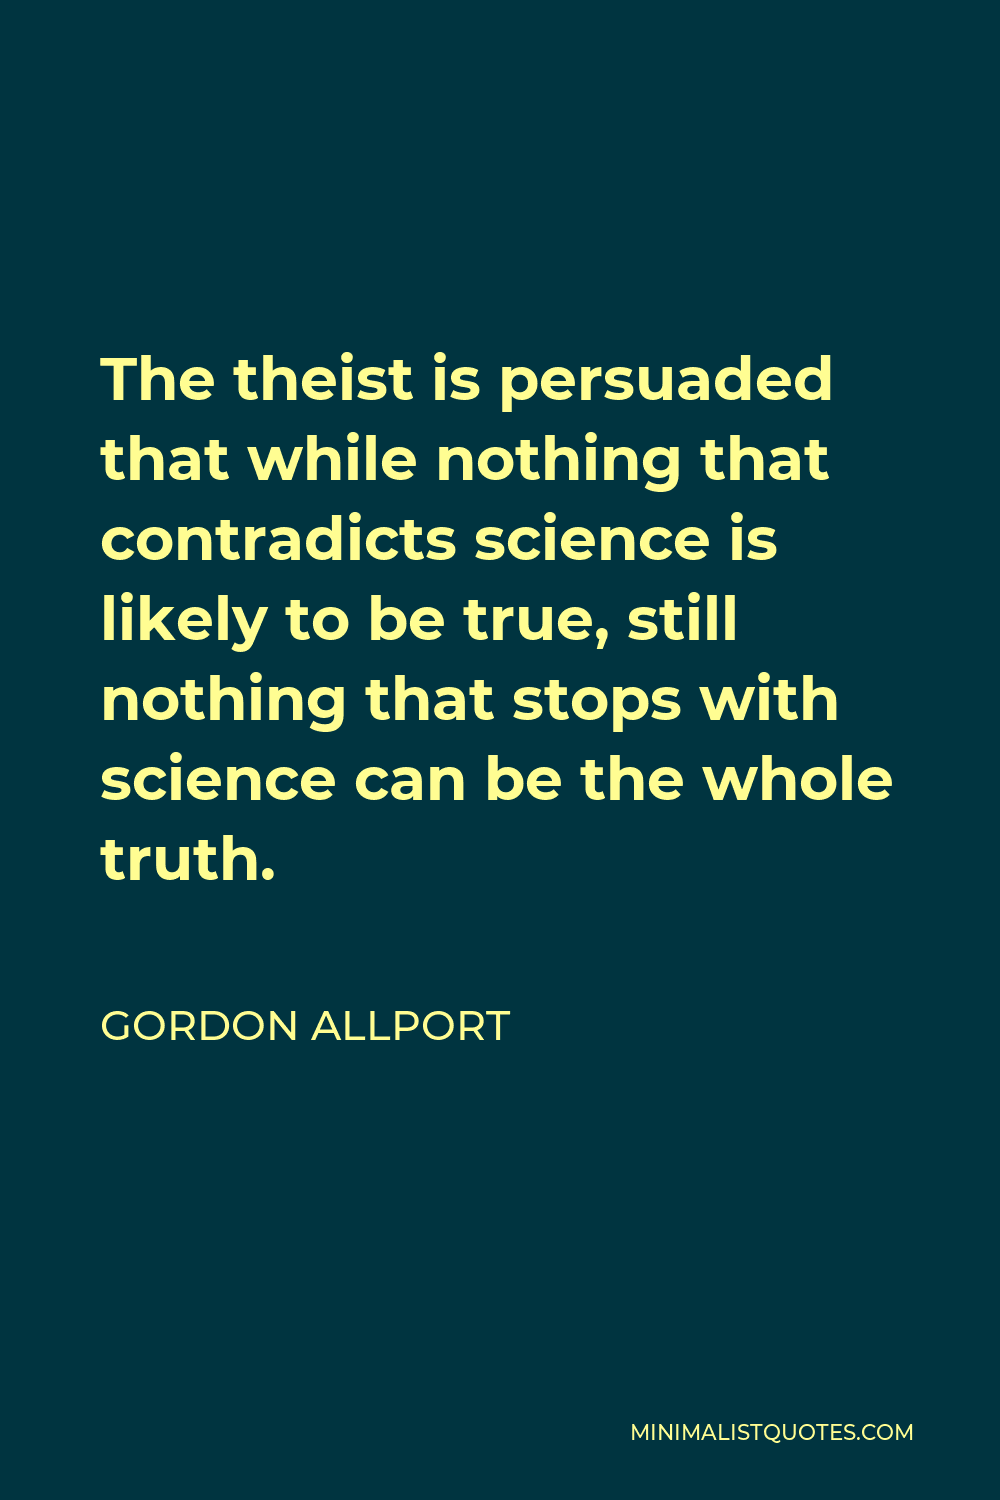 Gordon Allport Quote - The theist is persuaded that while nothing that contradicts science is likely to be true, still nothing that stops with science can be the whole truth.